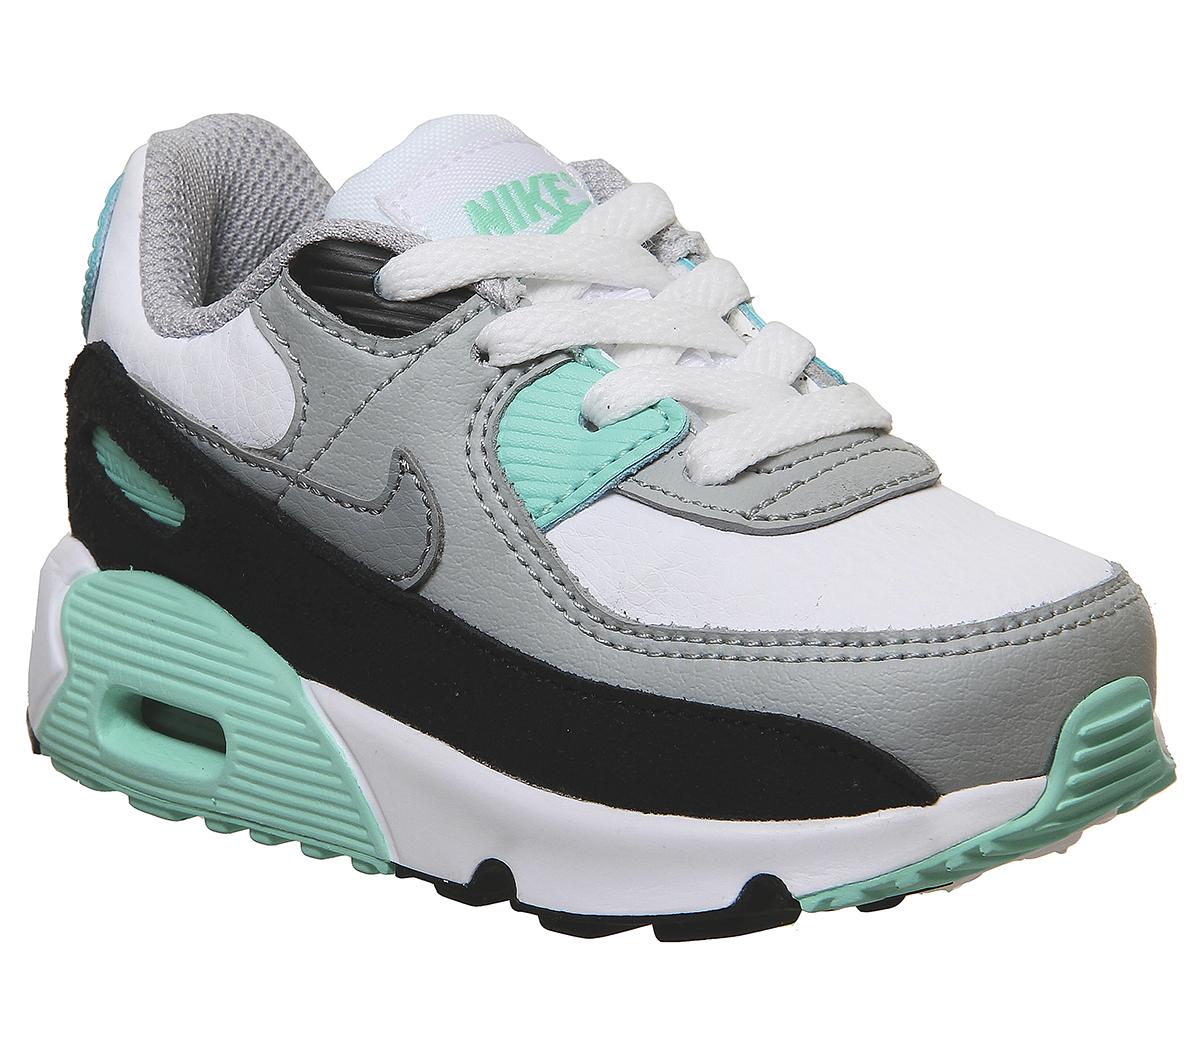 NikeAir Max 90 Infant TrainersWhite Particle Grey Smoke Grey Turquoise